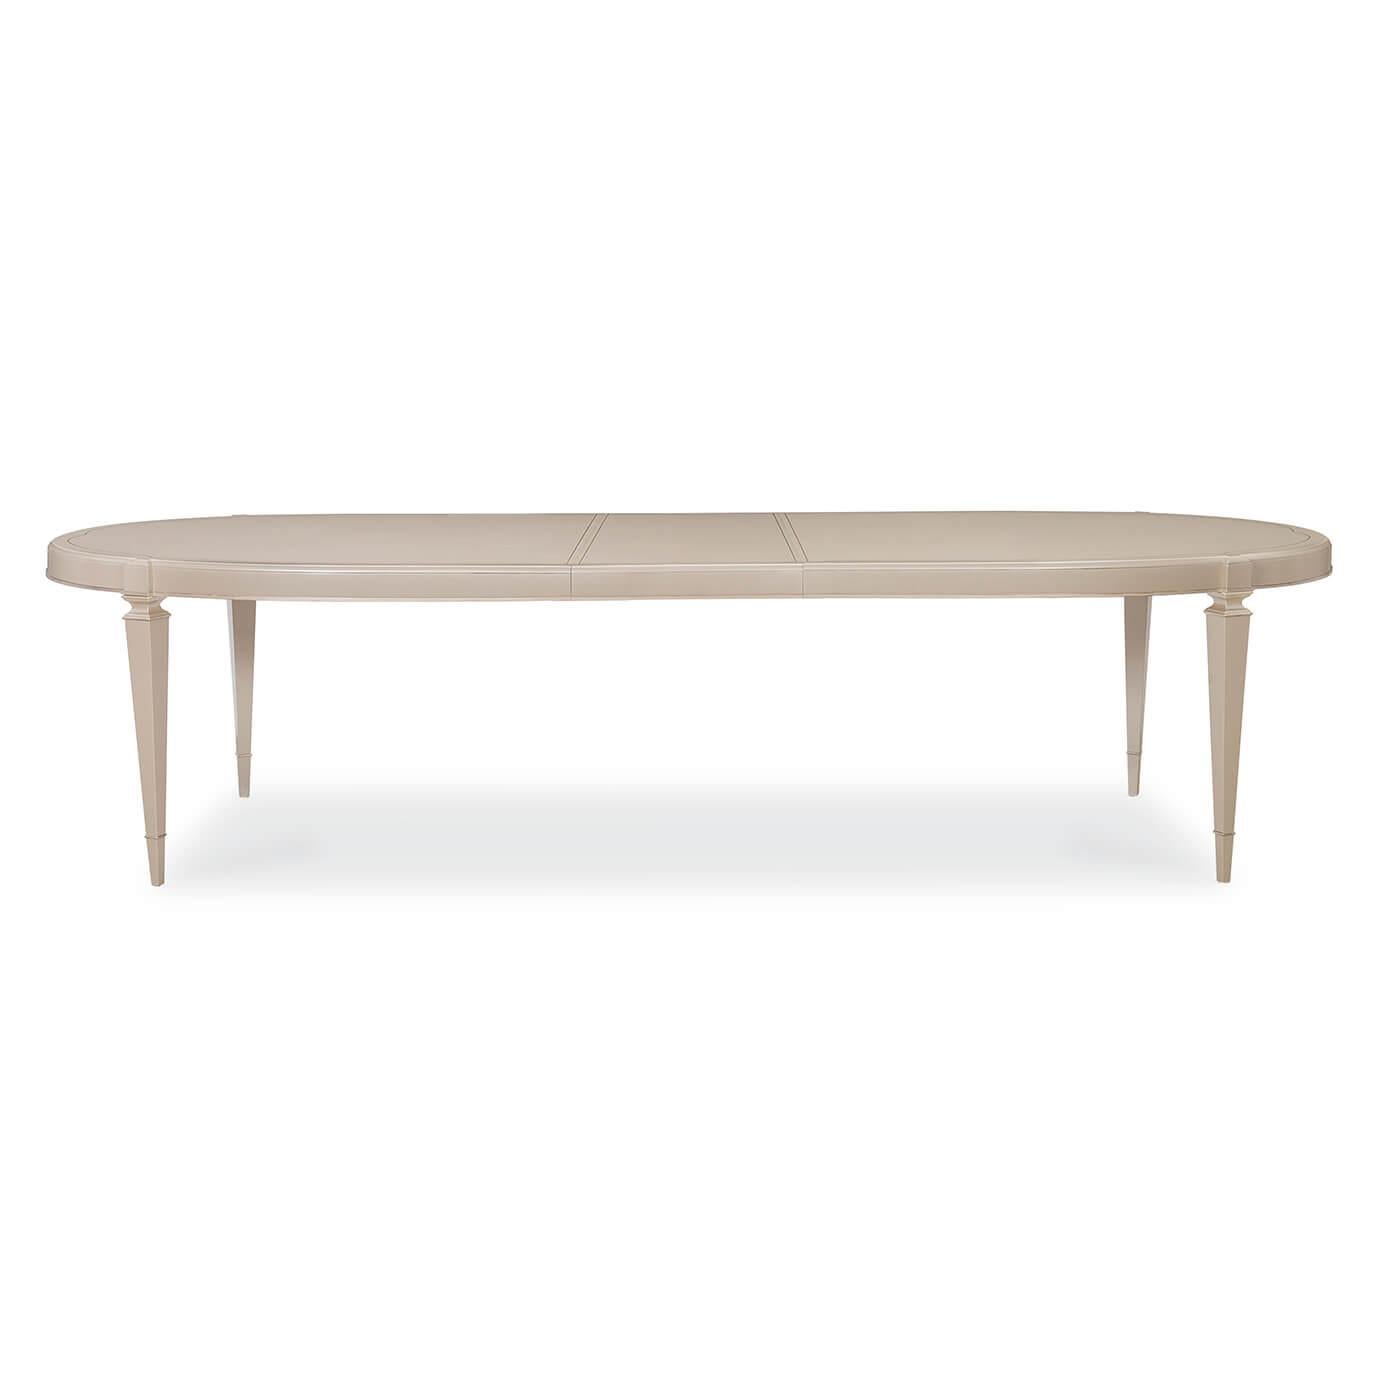 Asian European Art Deco Style Extension Dining Table